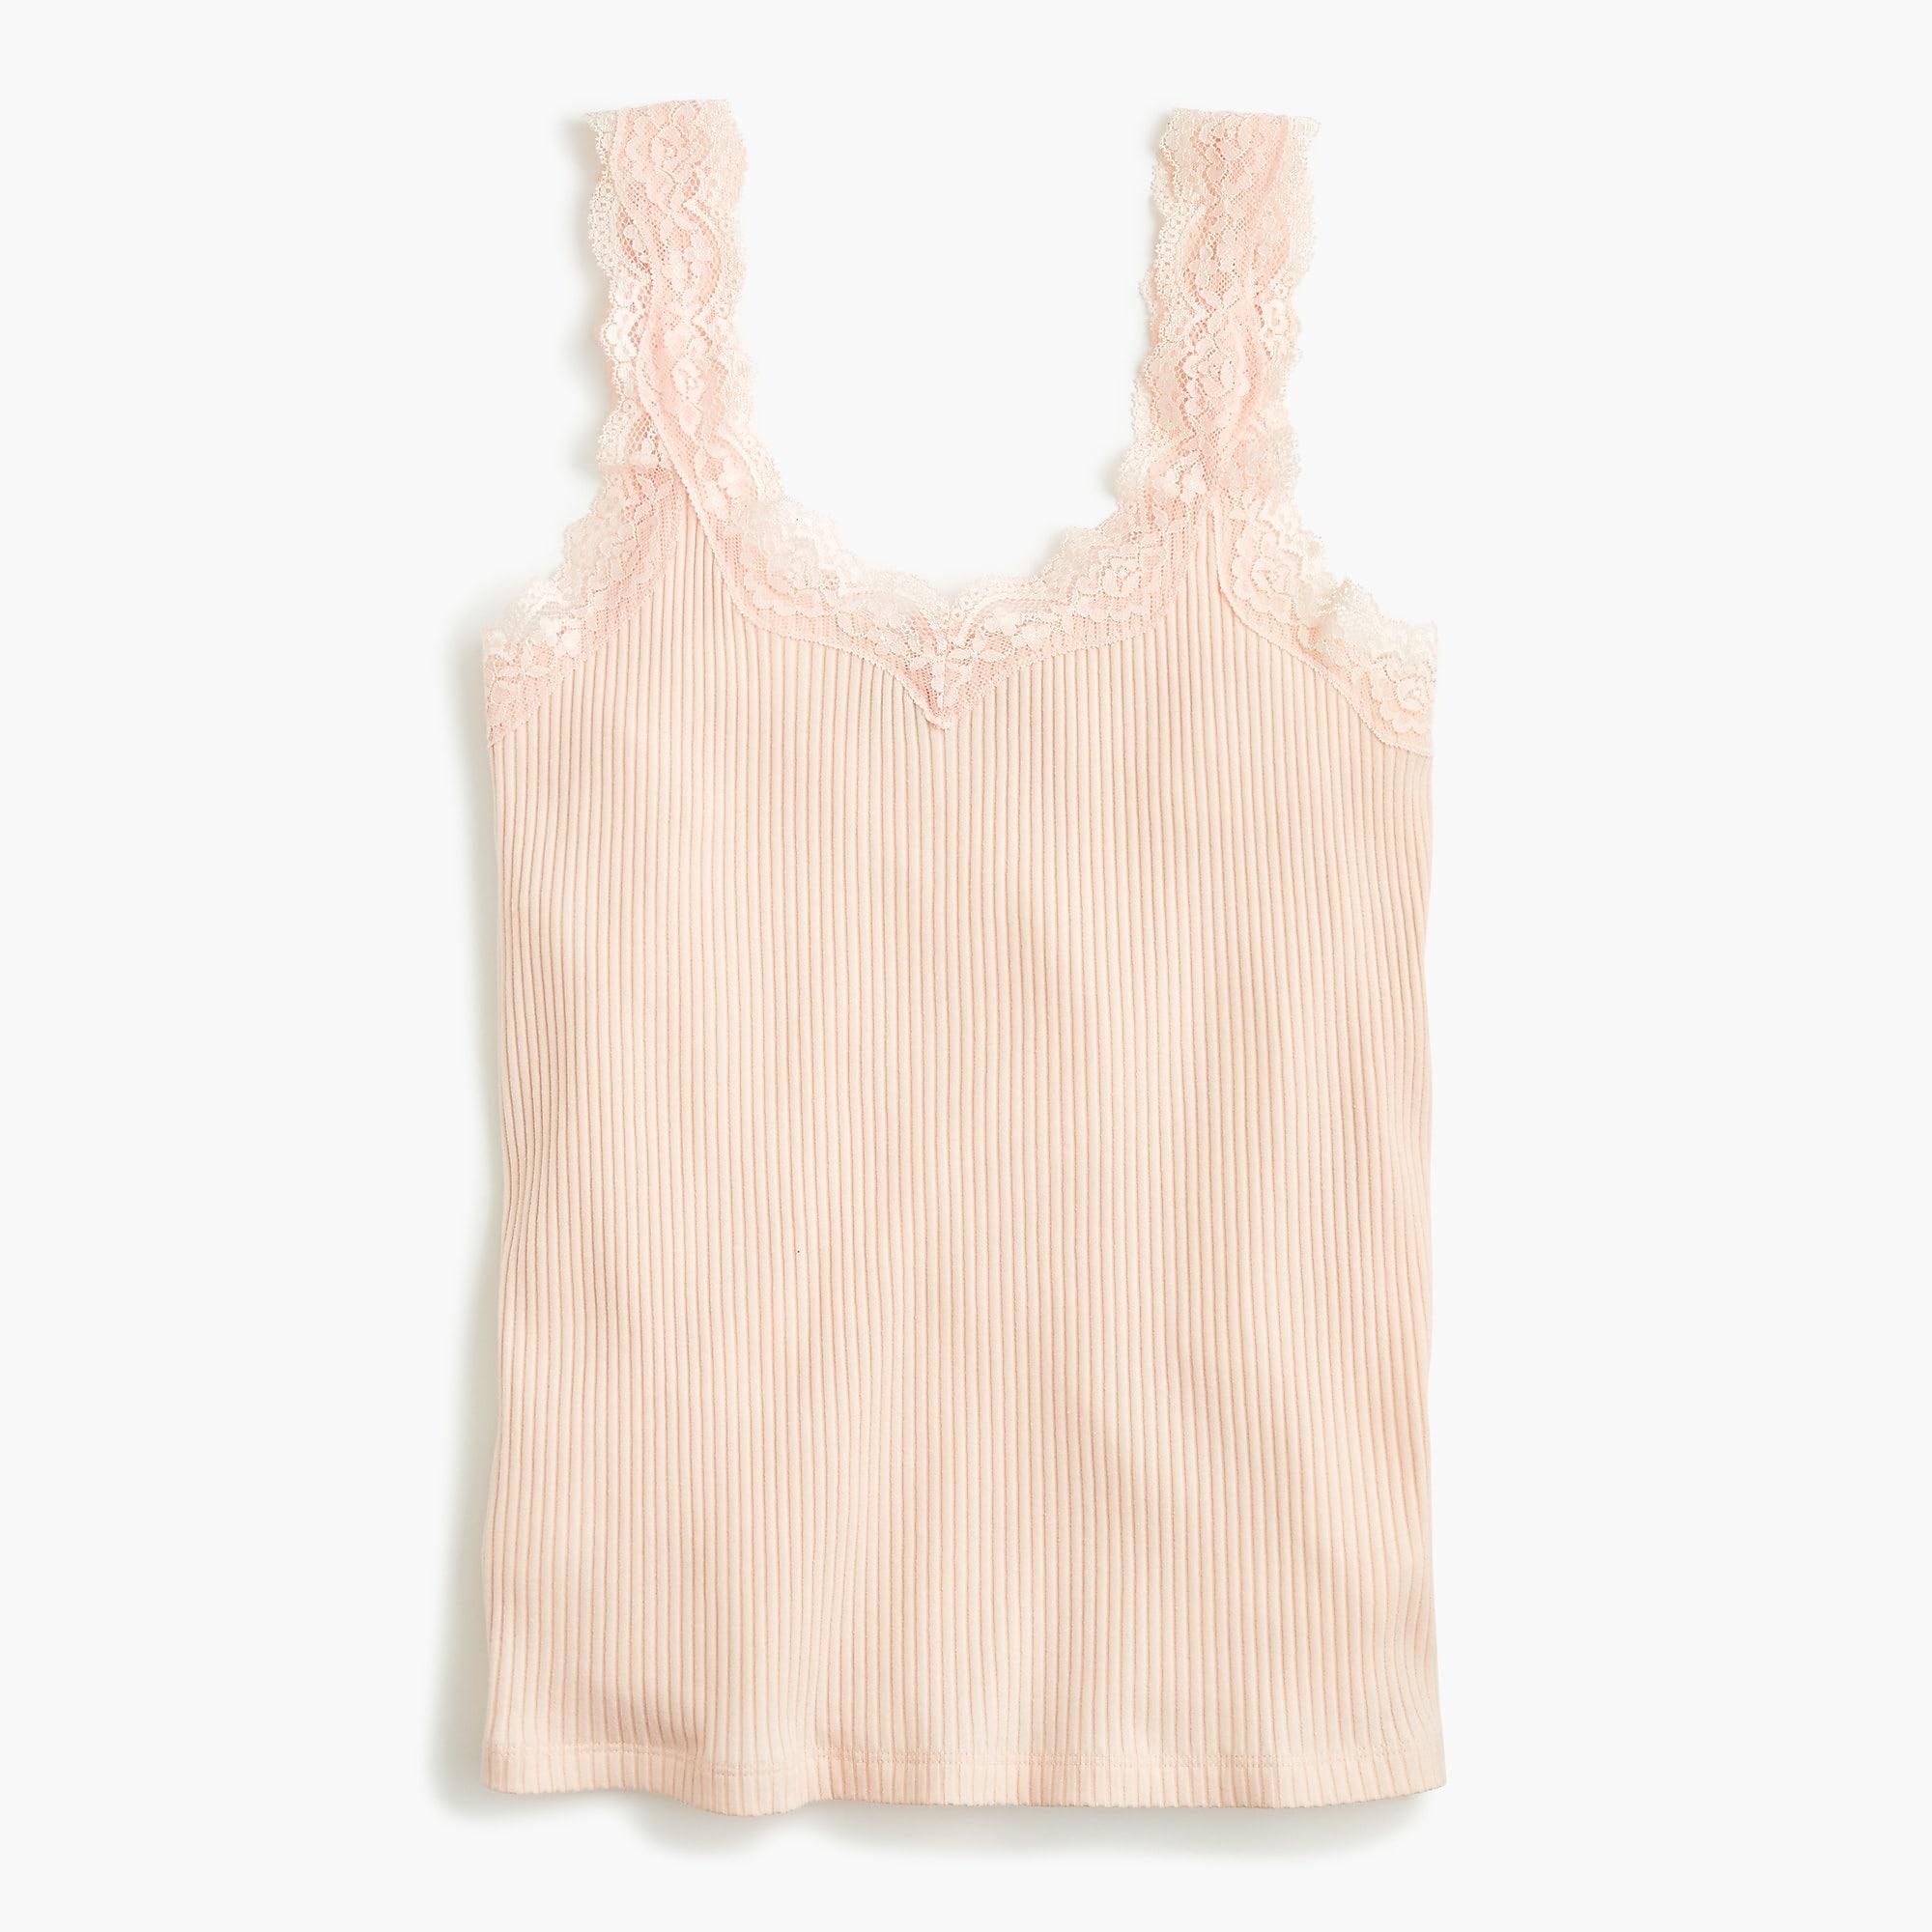 J.Crew Cotton Lace Trim Tank Top in Pink - Lyst